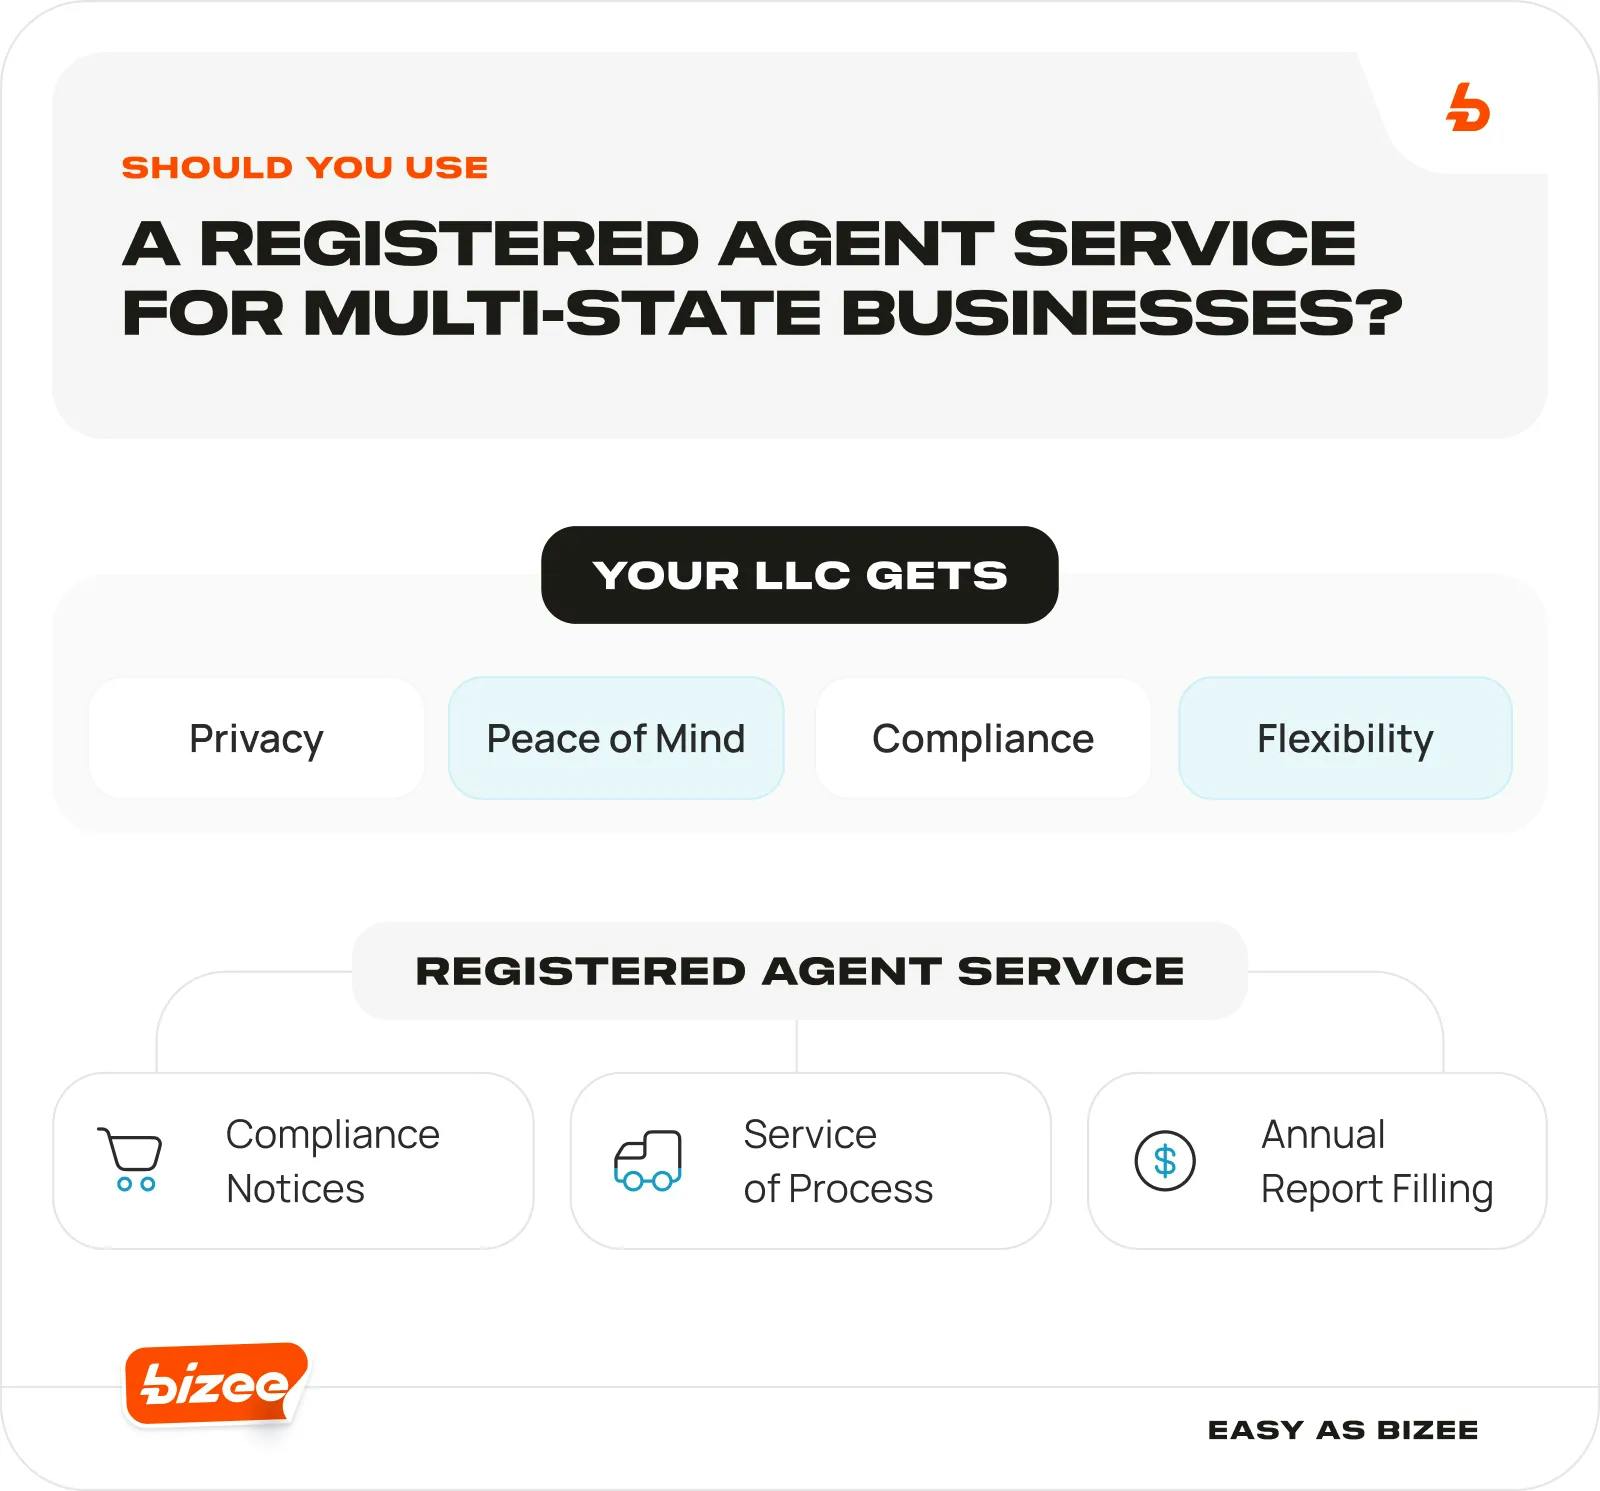 Should You Use a Registered Agent Service for Multi-State Businesses